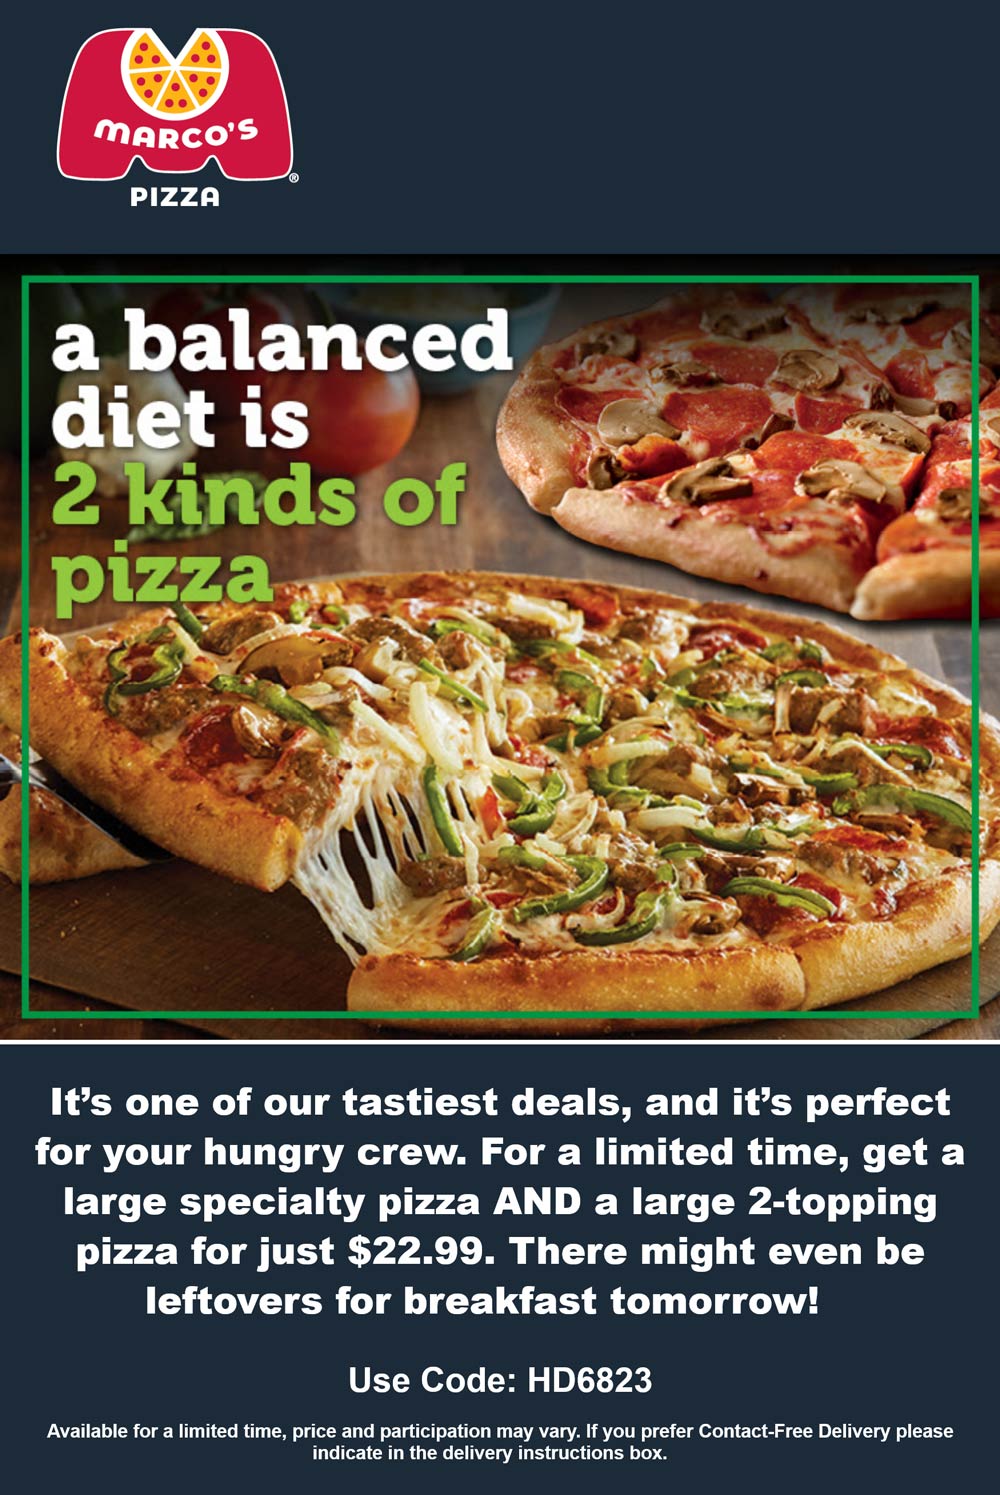 Marcos Pizza restaurants Coupon  Large specialty + large 2-topping = $23 at Marcos Pizza via promo code HD6823 #marcospizza 